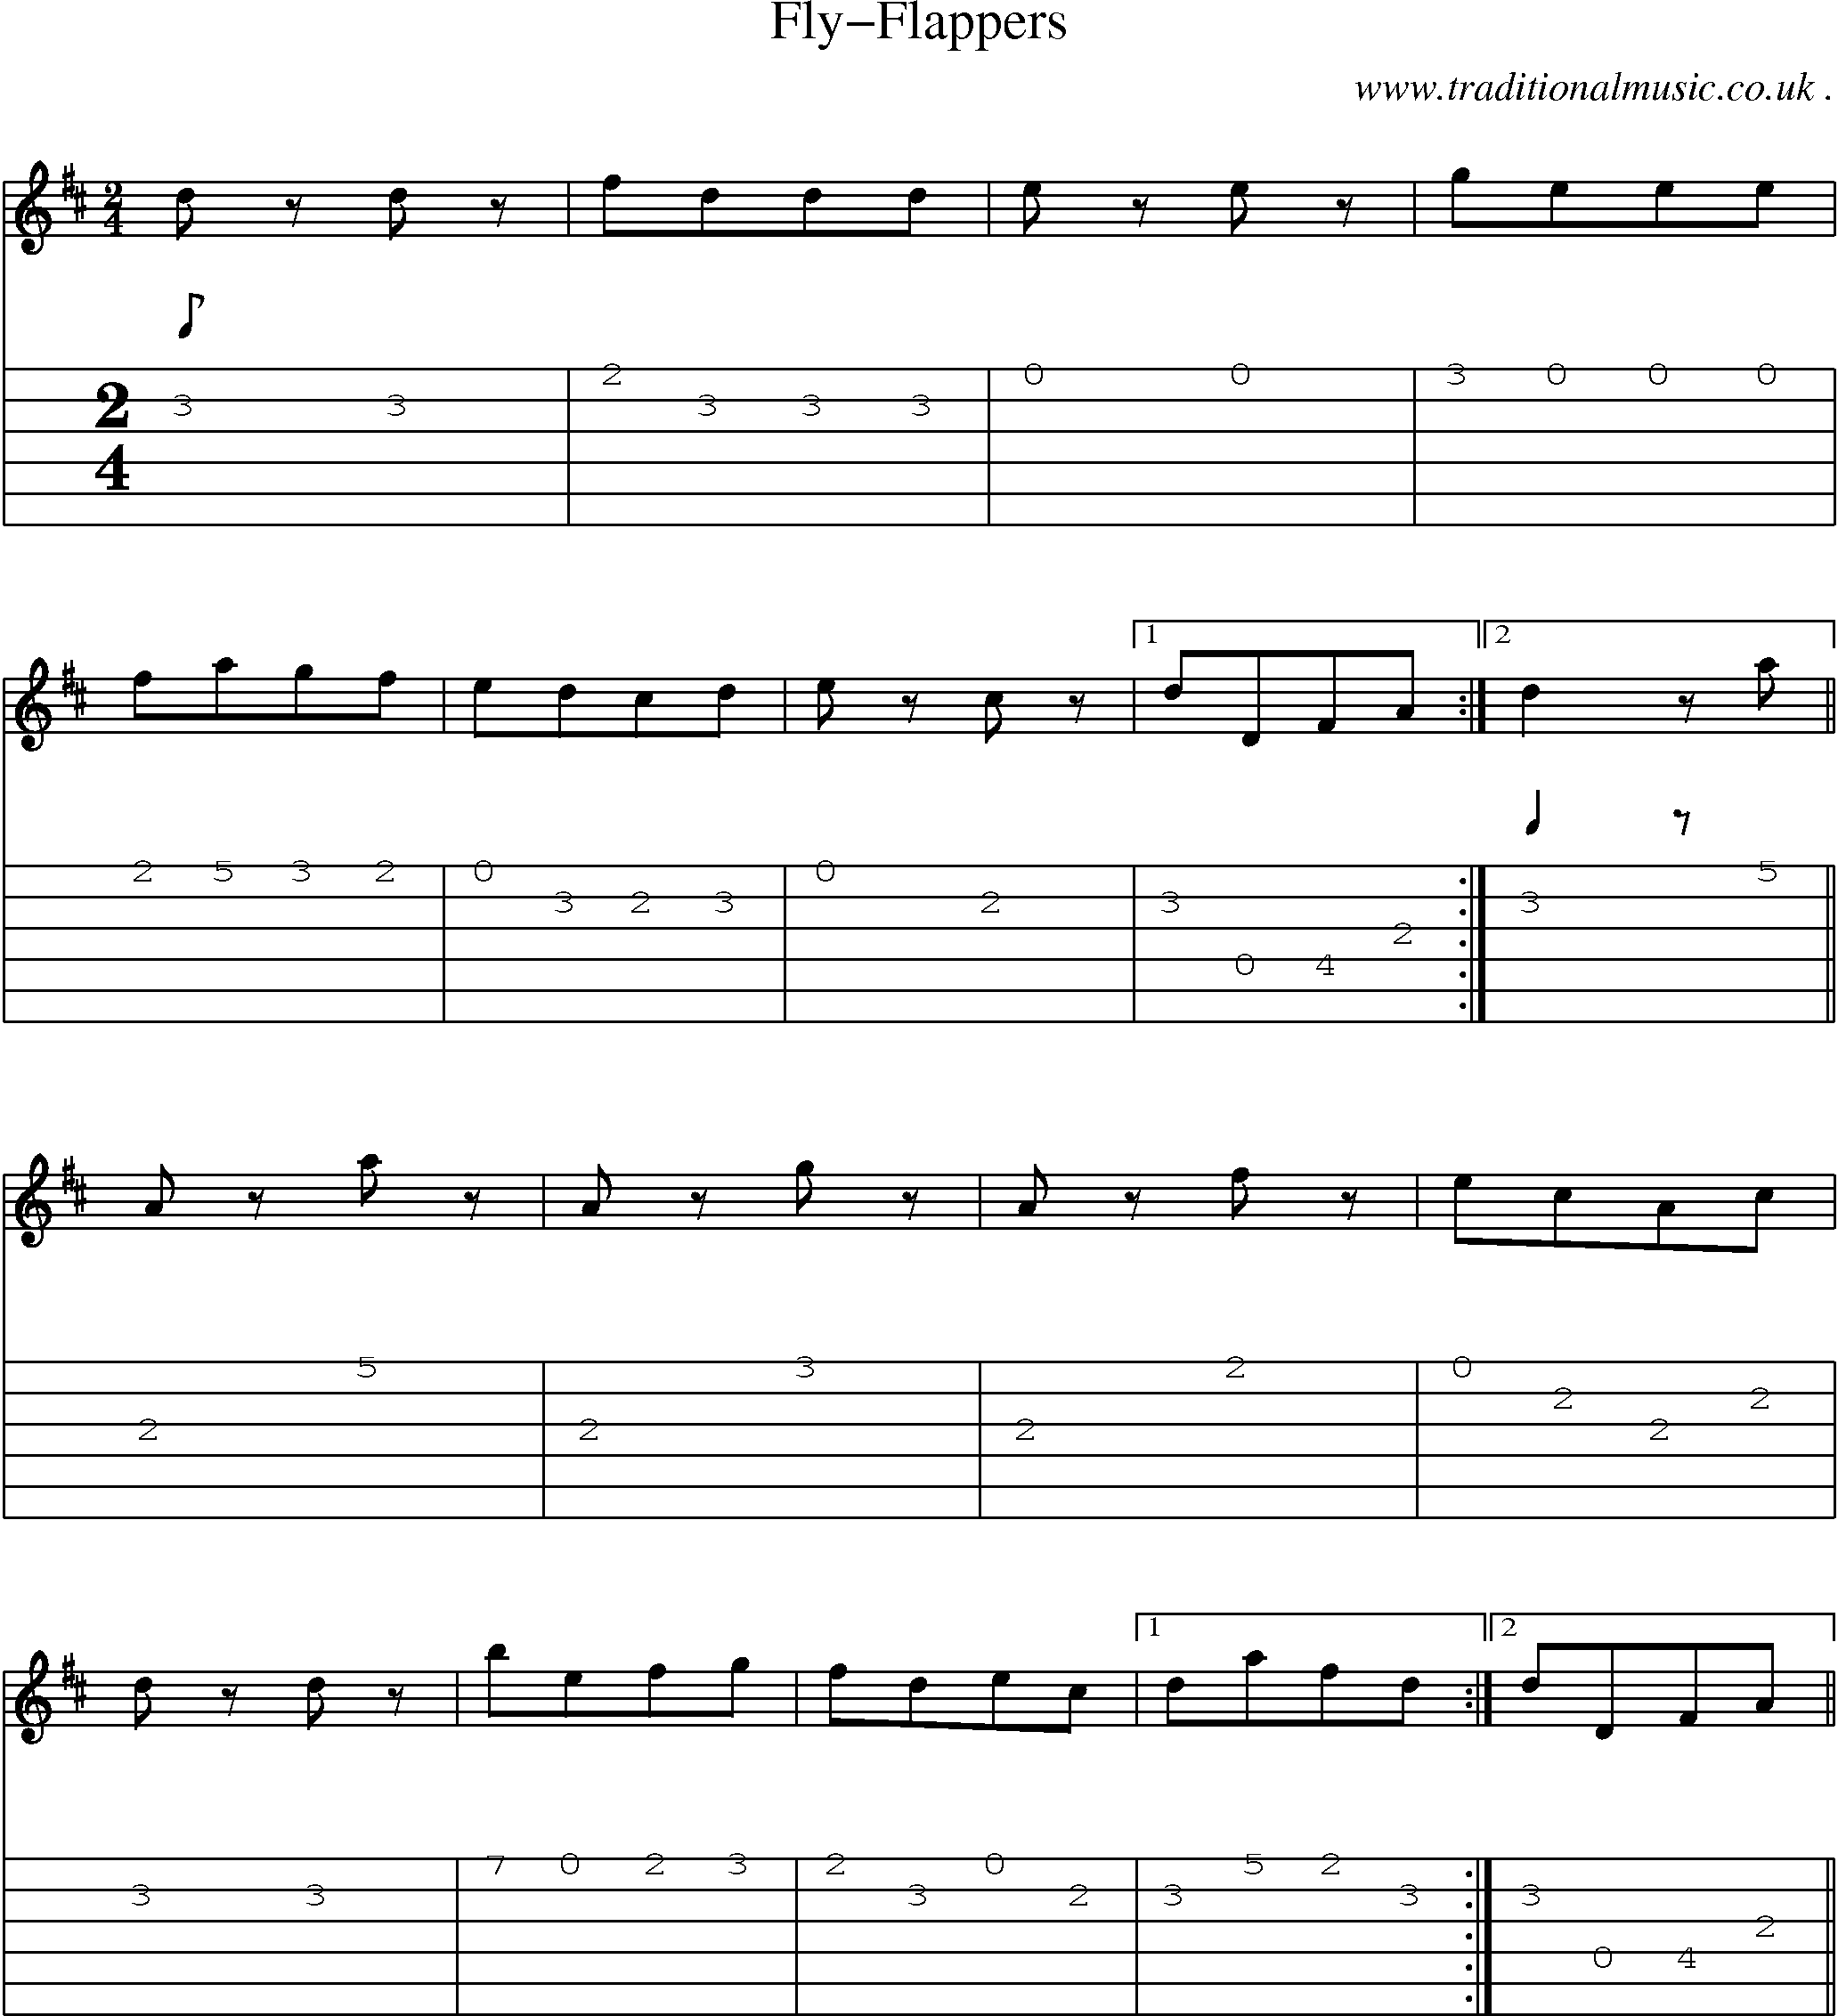 Sheet-Music and Guitar Tabs for Fly-flappers